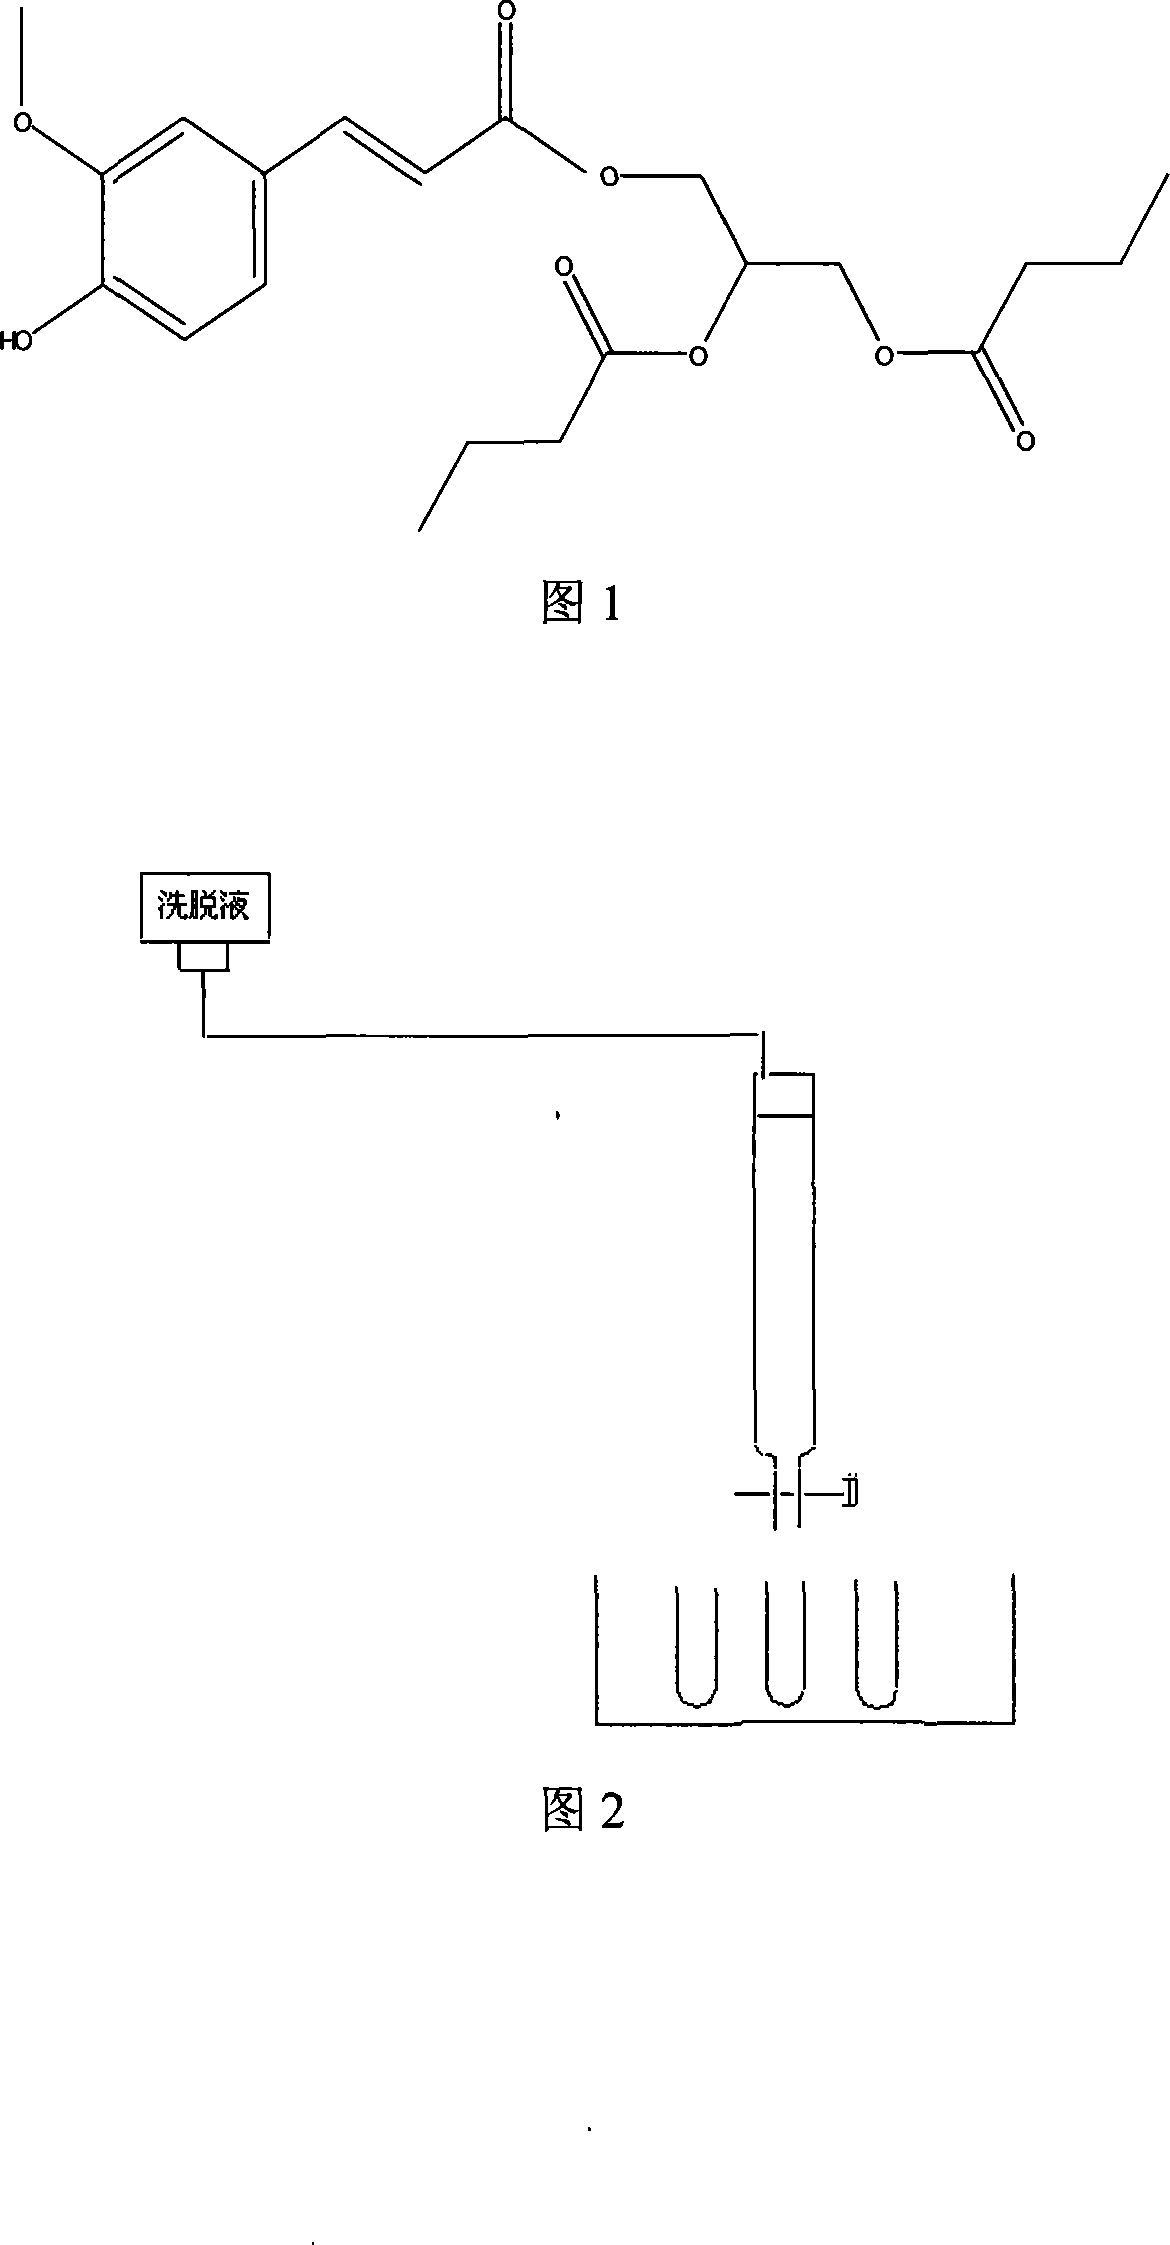 Method for synthesizing functional foodstuff antioxidant feruloylated dibutyrated acylglycerol accelerated by enzyme